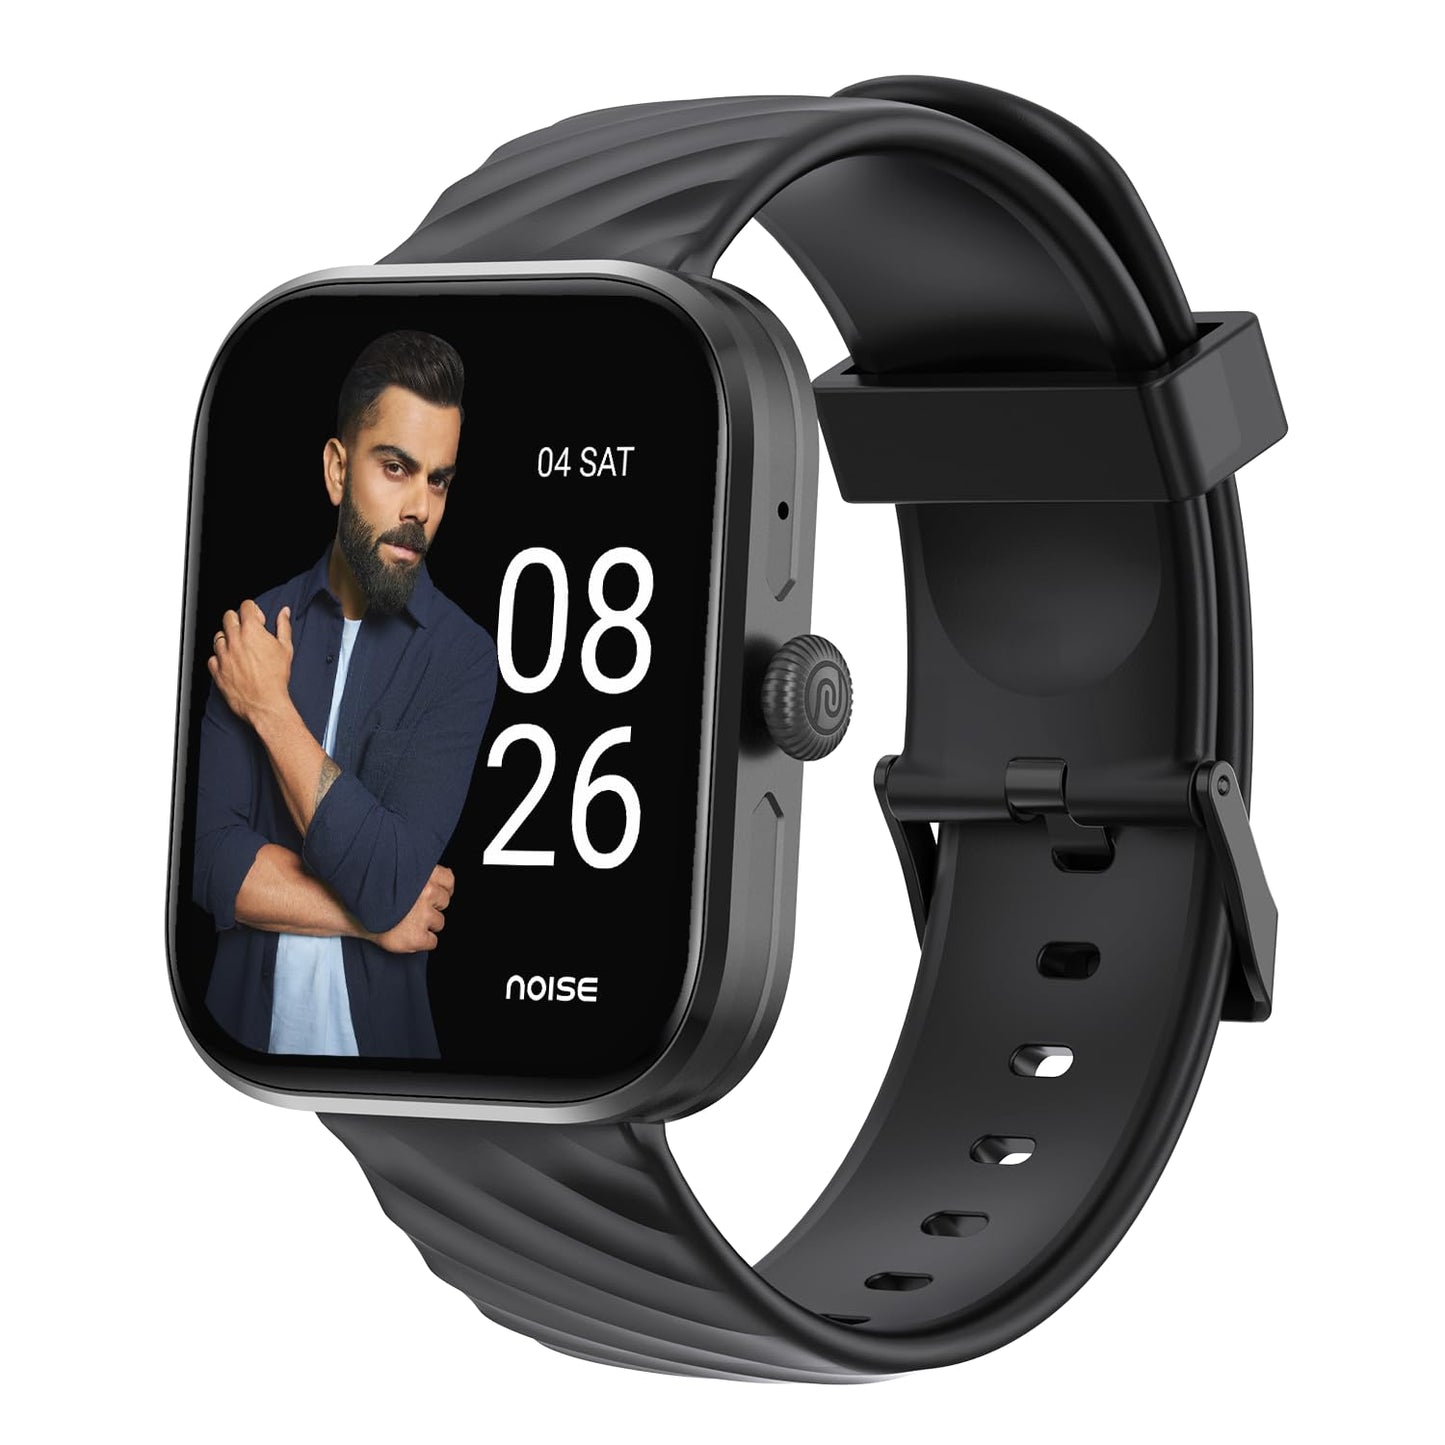 Noise Newly Launched ColorFit Spark with Massive 2" HD Display, Bluetooth Calling, 150+ Watch Faces, 100+ Sports Modes, 7 Days Battery Life Smart Watch for Men and Women - (Jet Black)